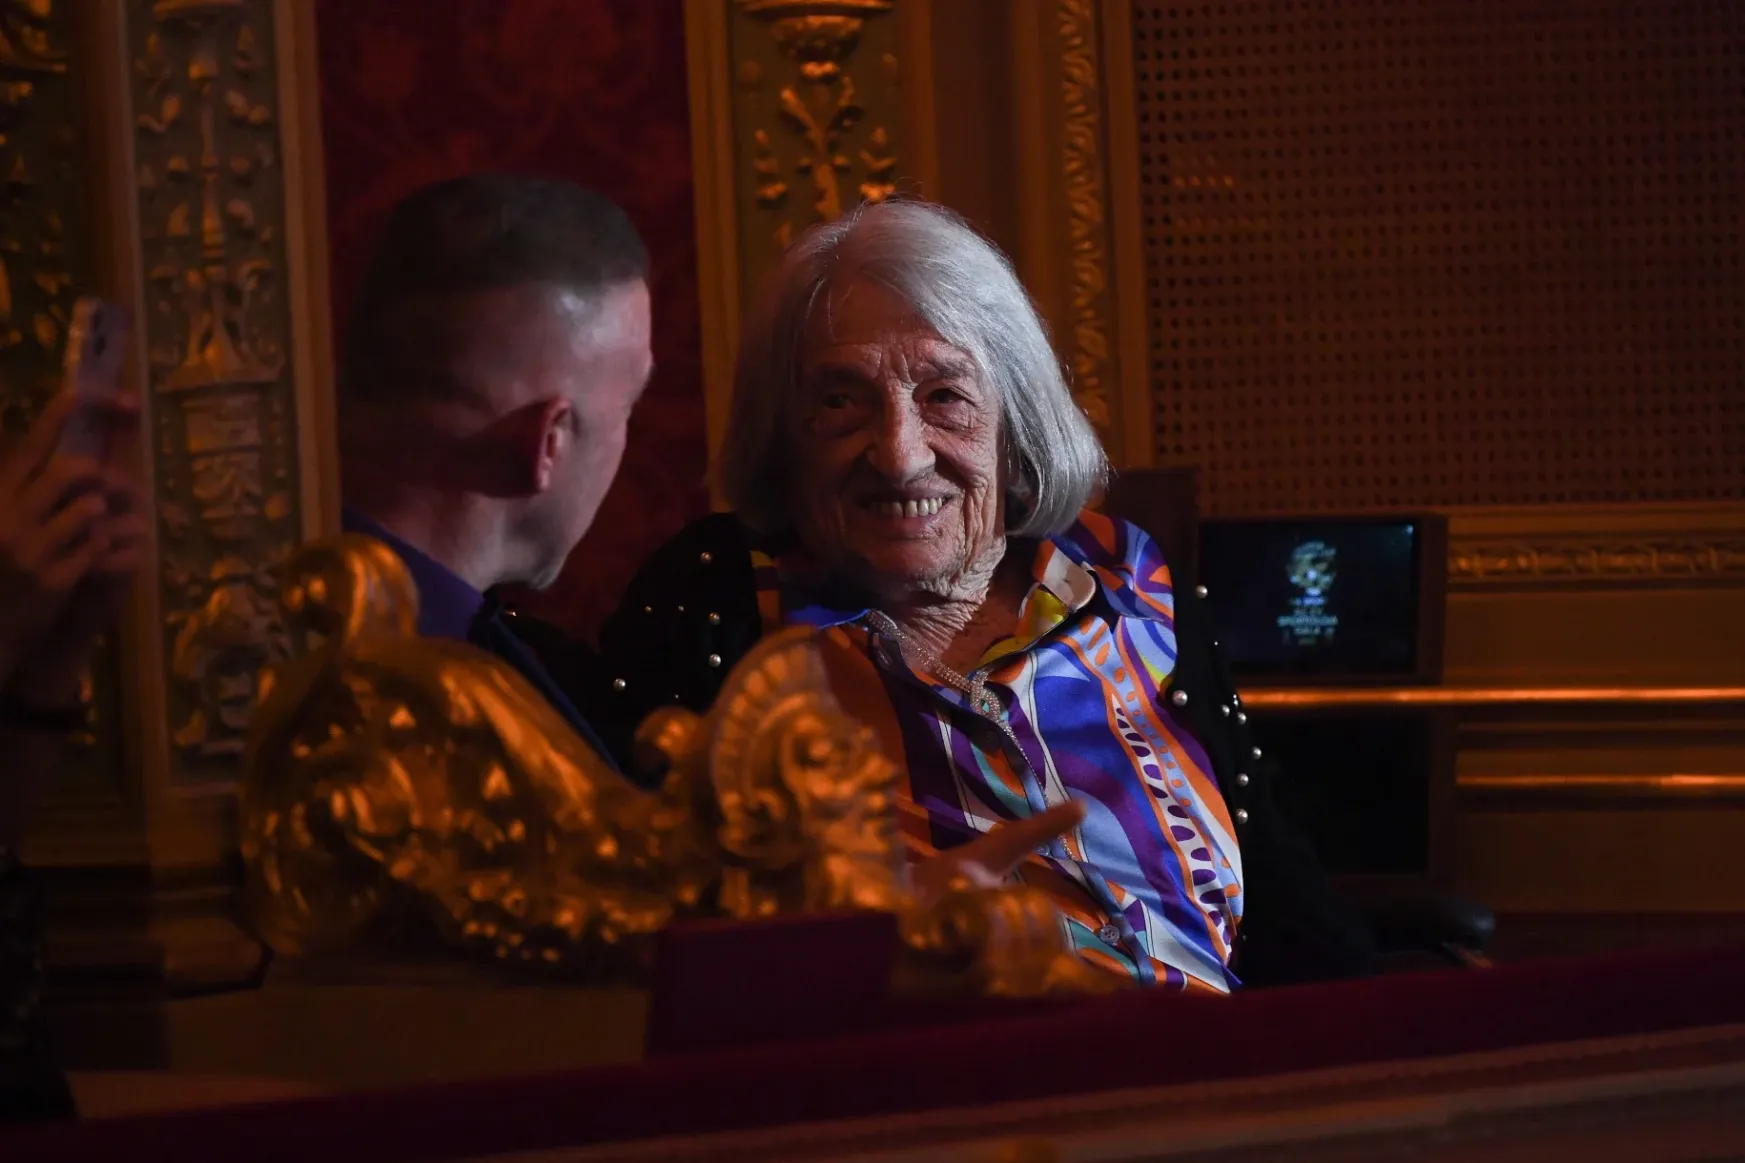 The world's oldest living olympian, Ágnes Keleti turns 102, and celebrates with a documentary about her life